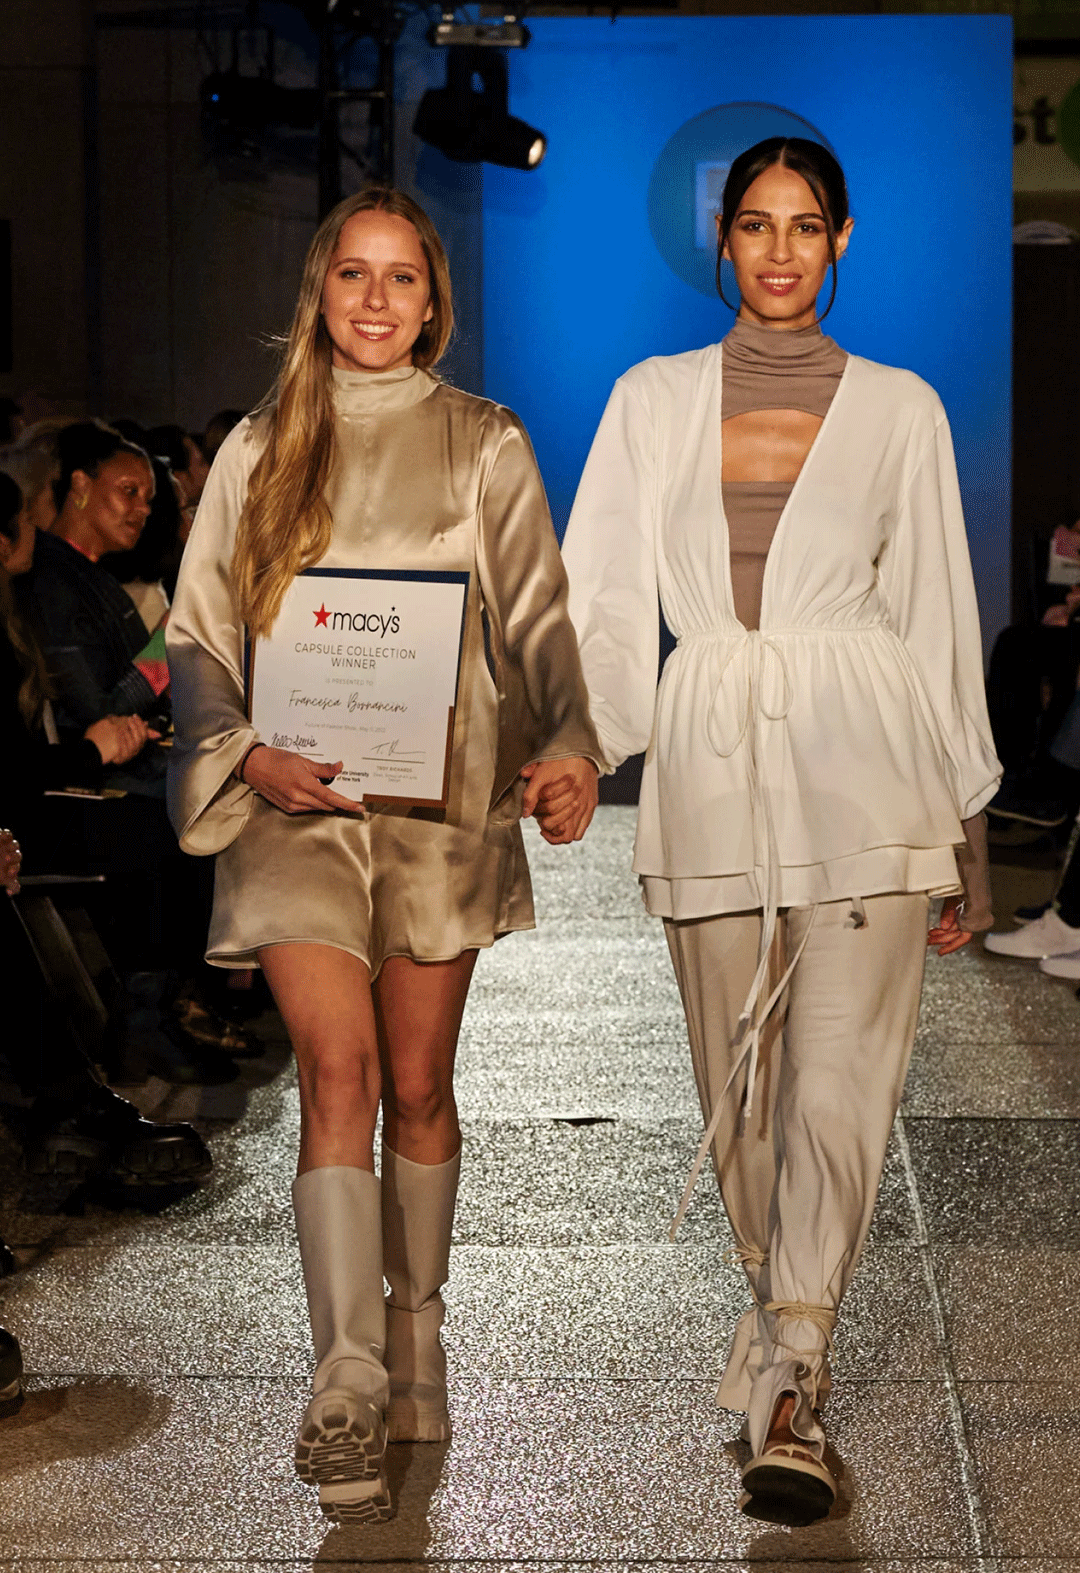 Francesca Bornancini walking down the runway with the model wearing her design